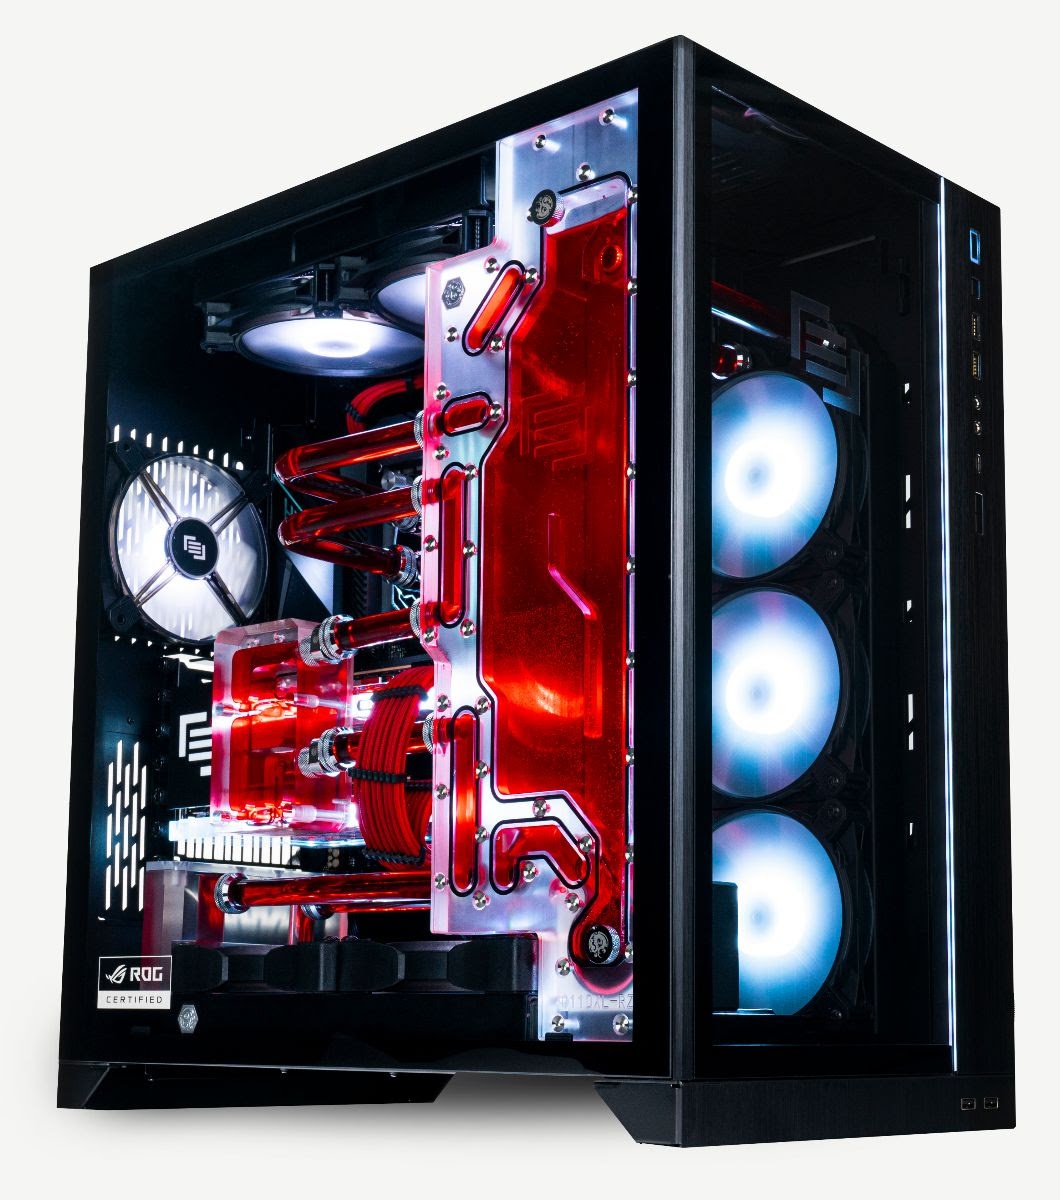 MAINGEAR Launches Intel 10th Gen Core i9-10900K Processor for Gaming Desktop and Workstations